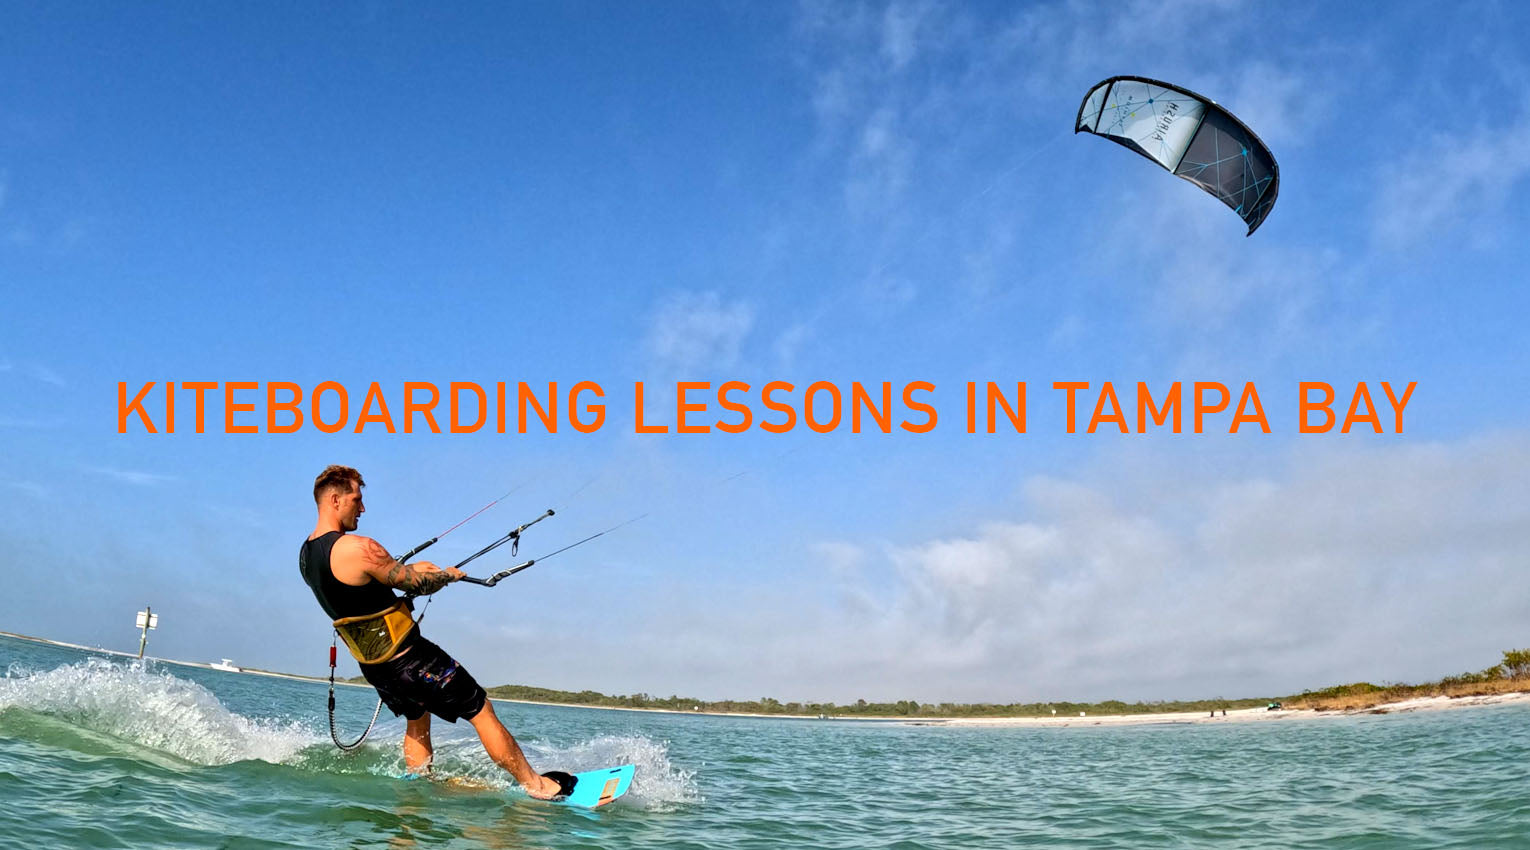 How many lessons does it take to learn kitesurfing?